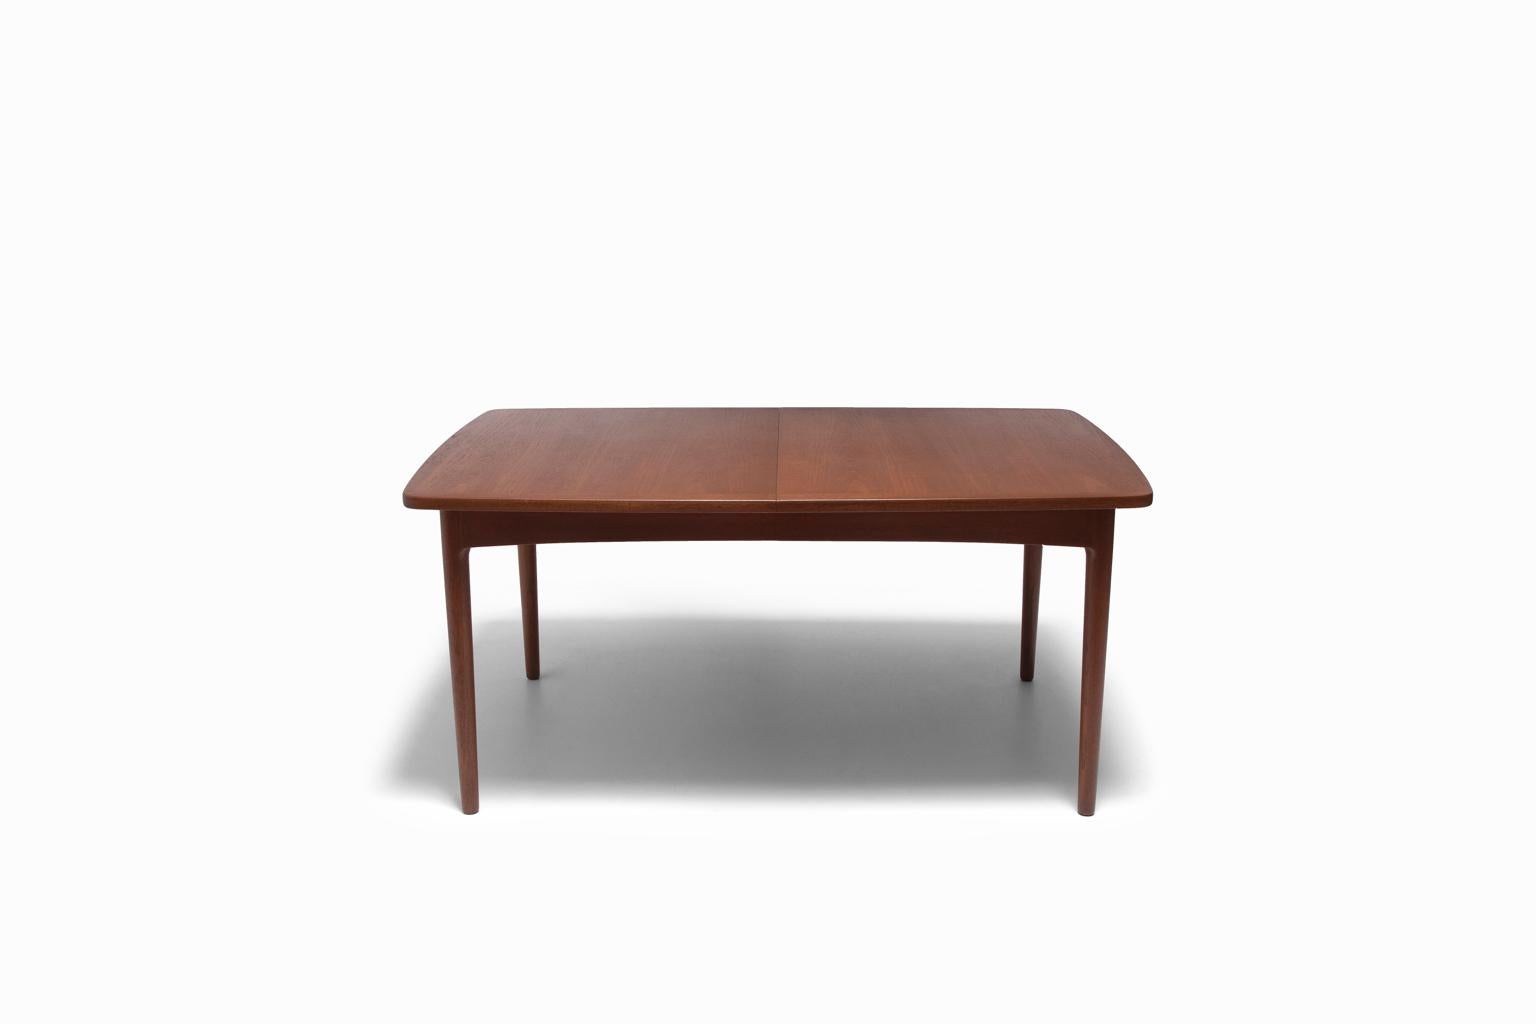 Henrik Worts Erik Worts Danish Mid-Century Modern Mahogany Table & Chairs In Excellent Condition For Sale In Bloomfield Hills, MI